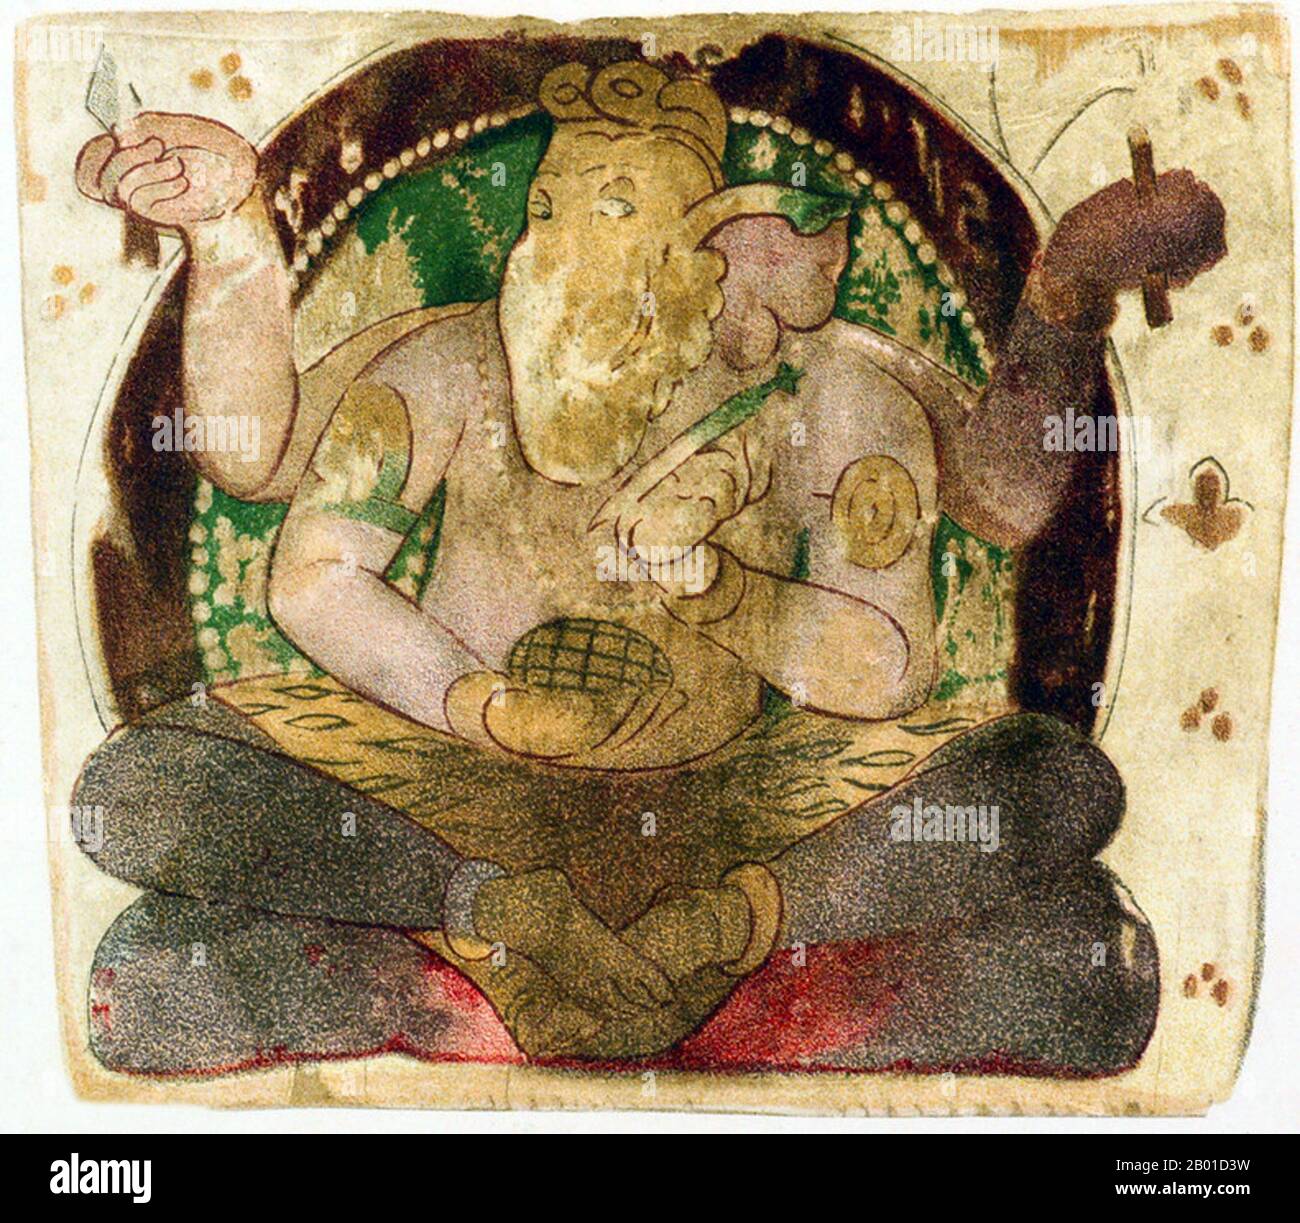 China: Panel from Dandan Oilik believed to represent the Hindu God Ganesh, 7th-8th century CE.  Dandan Oilik is a deserted historical town and desert oasis in the Taklamakan Desert of Xinjiang, China. Dandan Oilik was an important (though small) centre of local Buddhism and trade on the Silk Road. Its name means 'Houses of Ivory' and has been the site of a small number of significant archeological finds.  Having been abandoned hundreds of years ago, the oasis was found and lost to shifting desert sands several times. Stock Photo